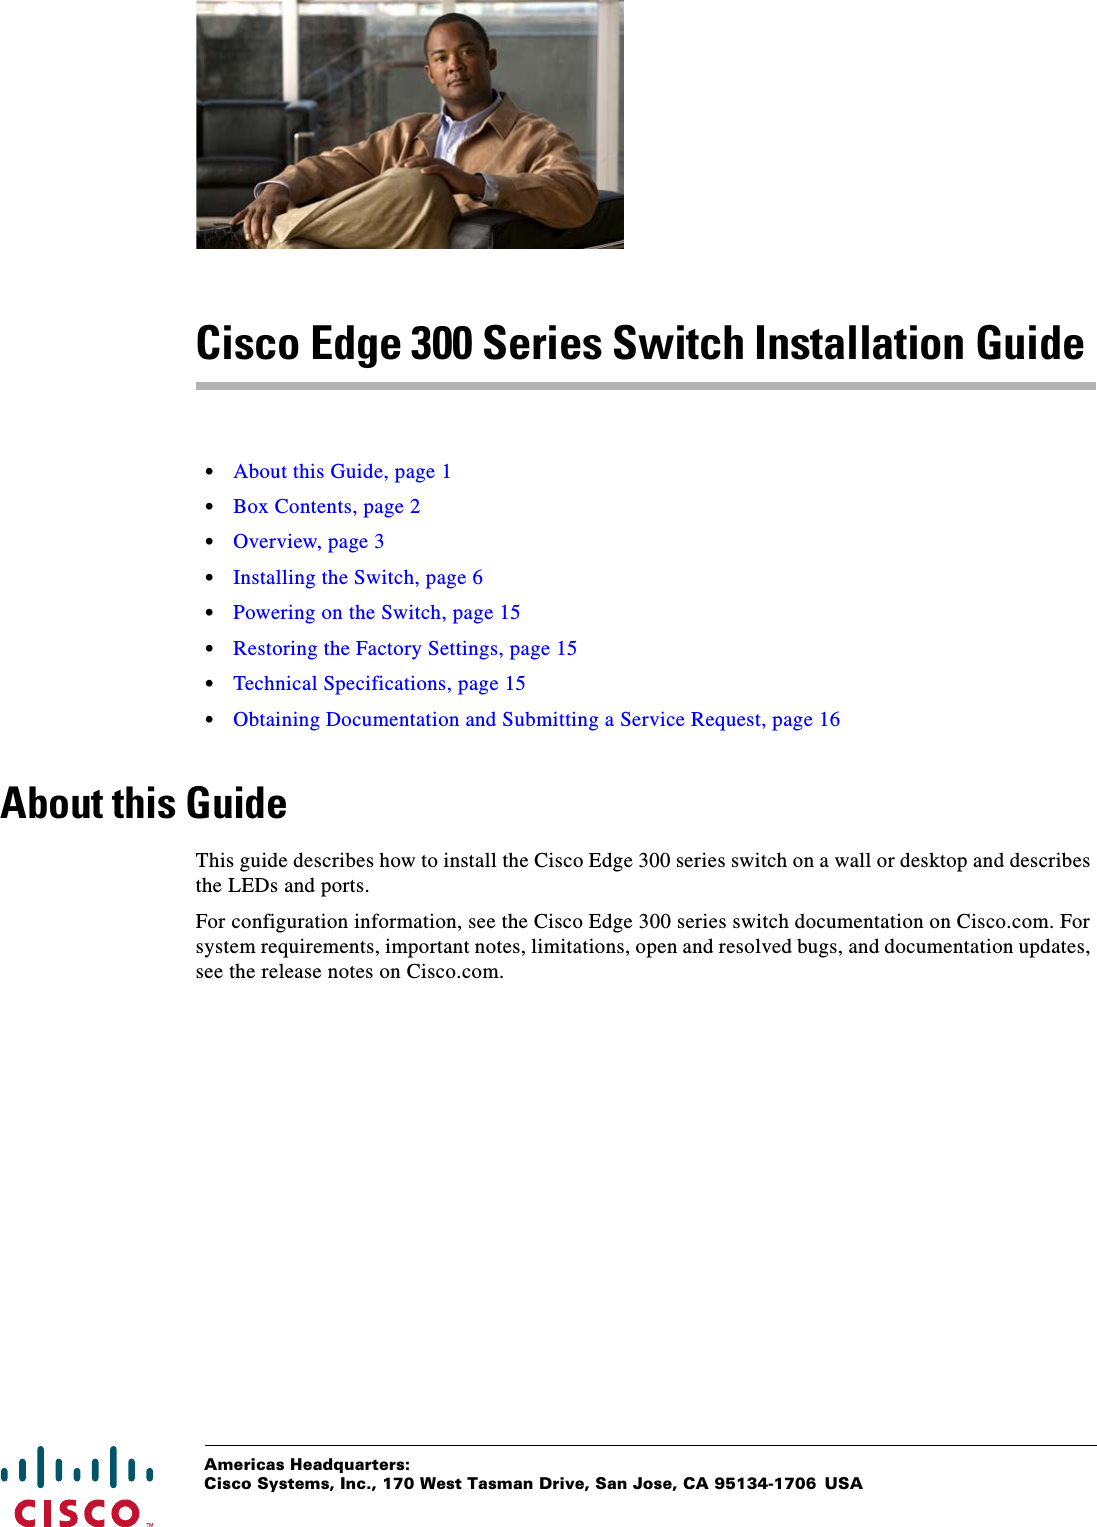  Americas Headquarters:Cisco Systems, Inc., 170 West Tasman Drive, San Jose, CA 95134-1706 USACisco Edge 300 Series Switch Installation Guide•About this Guide, page 1•Box Contents, page 2•Overview, page 3•Installing the Switch, page 6•Powering on the Switch, page 15•Restoring the Factory Settings, page 15•Technical Specifications, page 15•Obtaining Documentation and Submitting a Service Request, page 16About this GuideThis guide describes how to install the Cisco Edge 300 series switch on a wall or desktop and describes the LEDs and ports.For configuration information, see the Cisco Edge 300 series switch documentation on Cisco.com. For system requirements, important notes, limitations, open and resolved bugs, and documentation updates, see the release notes on Cisco.com.